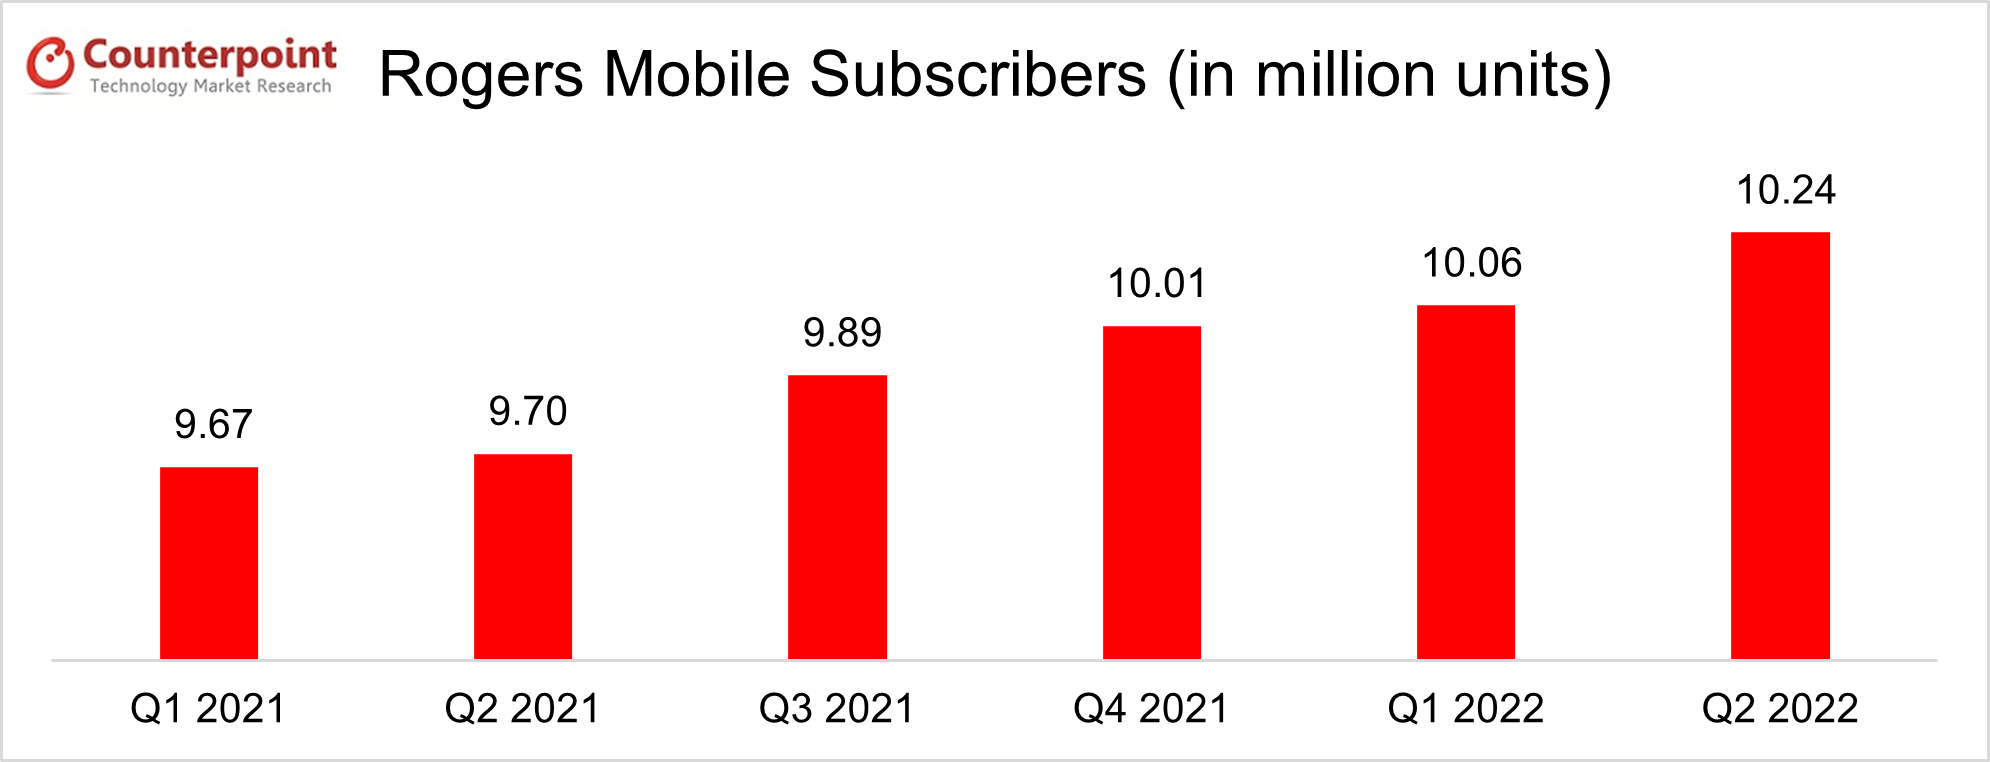 Rogers Mobile Subs_Q2 2022